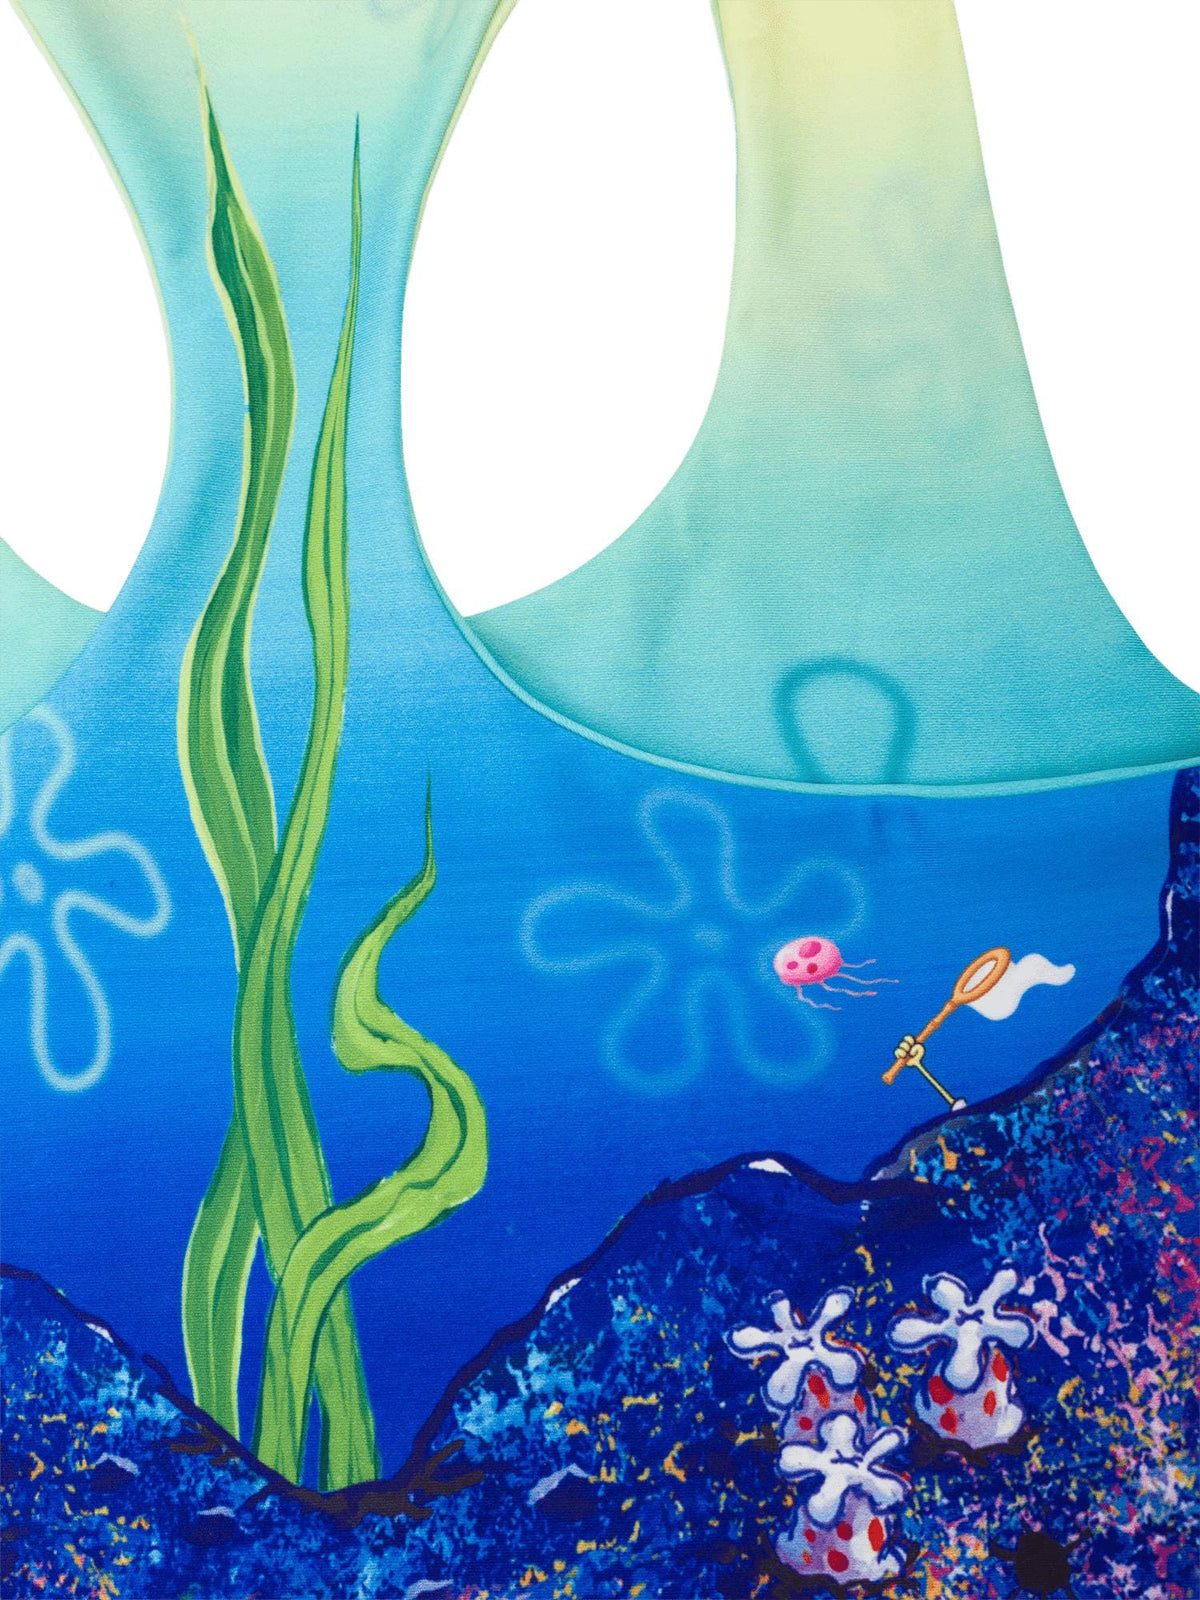 Close up detail image showing the back right side of the top with SpongeBob&#39;s hand catching a jellyfish in a net